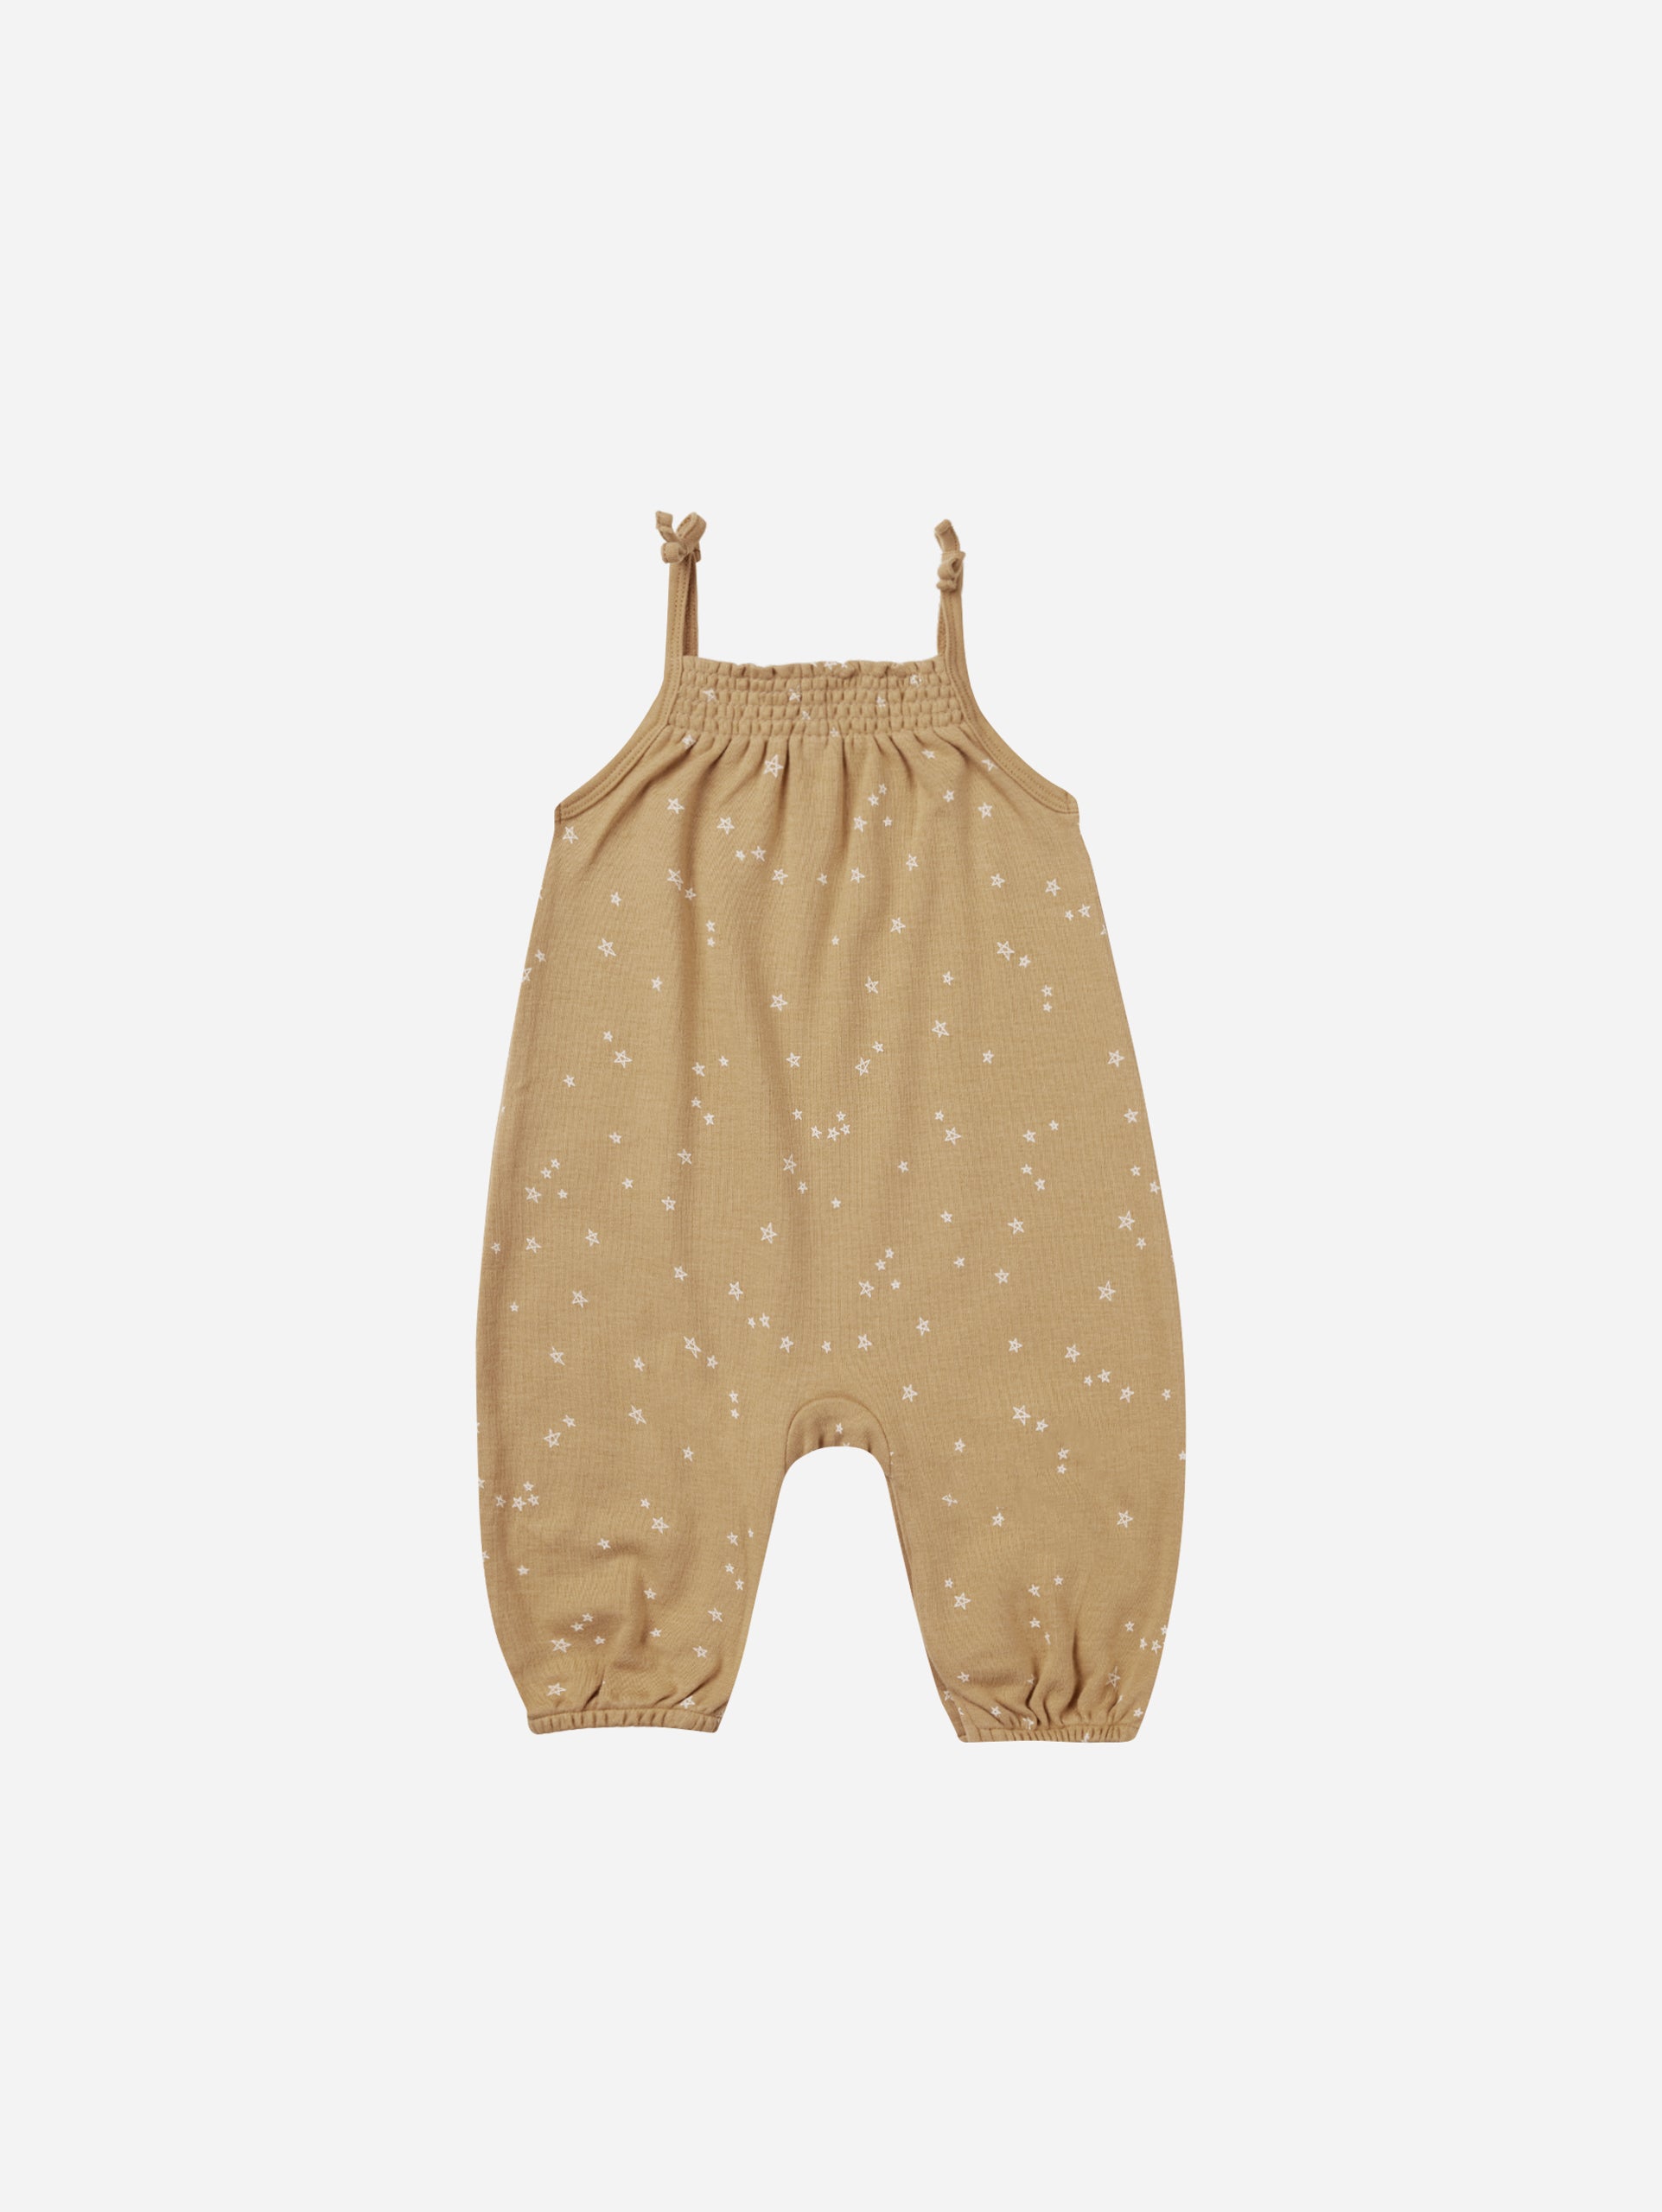 Smocked Jumpsuit || Stars - Rylee + Cru | Kids Clothes | Trendy Baby Clothes | Modern Infant Outfits |